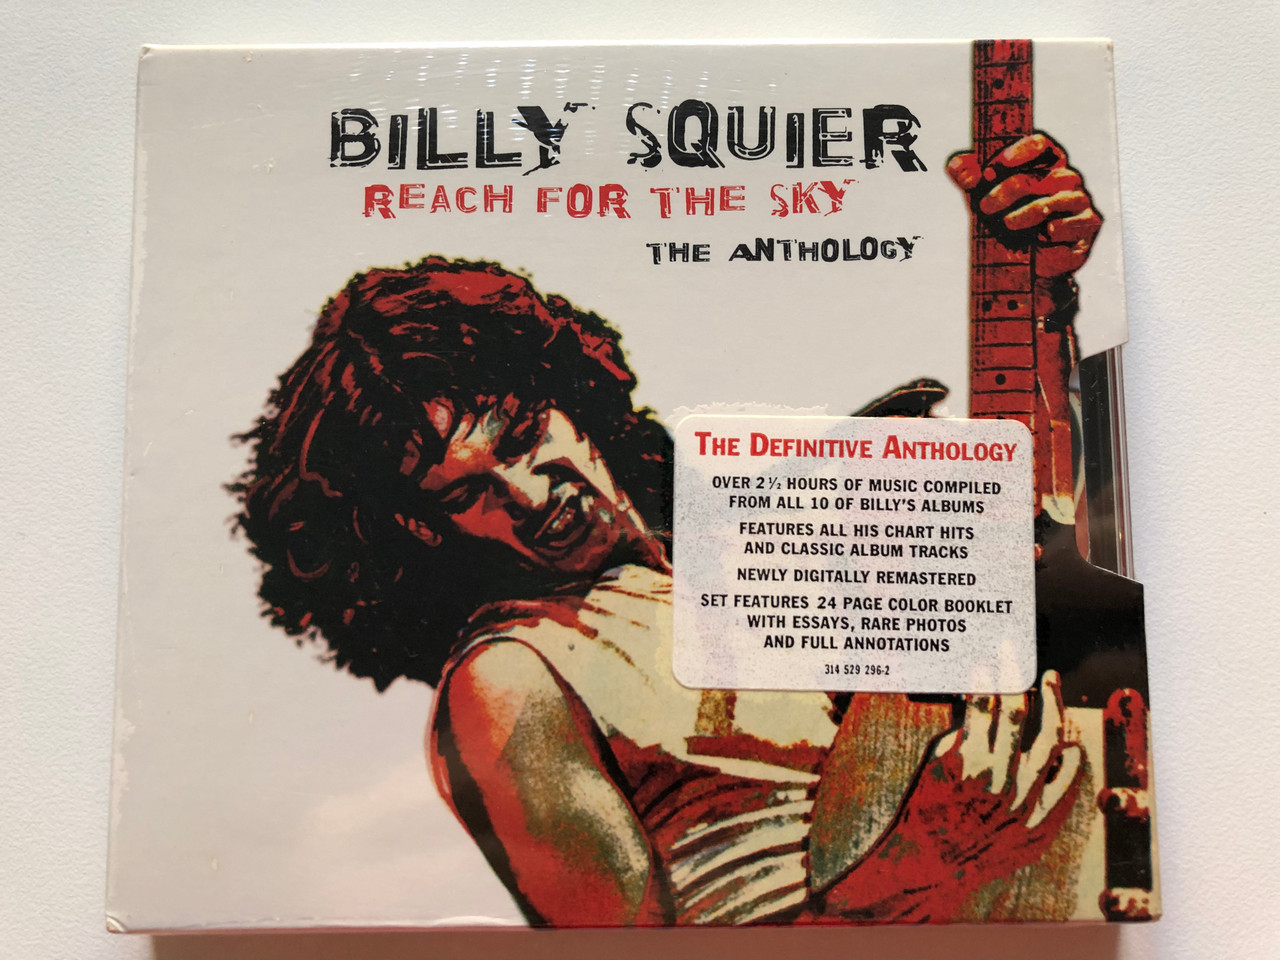 https://cdn10.bigcommerce.com/s-62bdpkt7pb/products/0/images/203301/Billy_Squier_Reach_For_The_Sky_The_Anthology_Over_2_12_Hours_Of_Music_Compiled_From_All_10_Of_Billys_Albums_Features_All_His_Chart_Hits_And_Classic_Album_Tracks._Newly_Digitally_Remaster_1__49686.1640712731.1280.1280.JPG?c=2&_gl=1*p571m1*_ga*MjA2NTIxMjE2MC4xNTkwNTEyNTMy*_ga_WS2VZYPC6G*MTY0MDcwMjMxMS4yMzcuMS4xNjQwNzEyMzI0LjIz